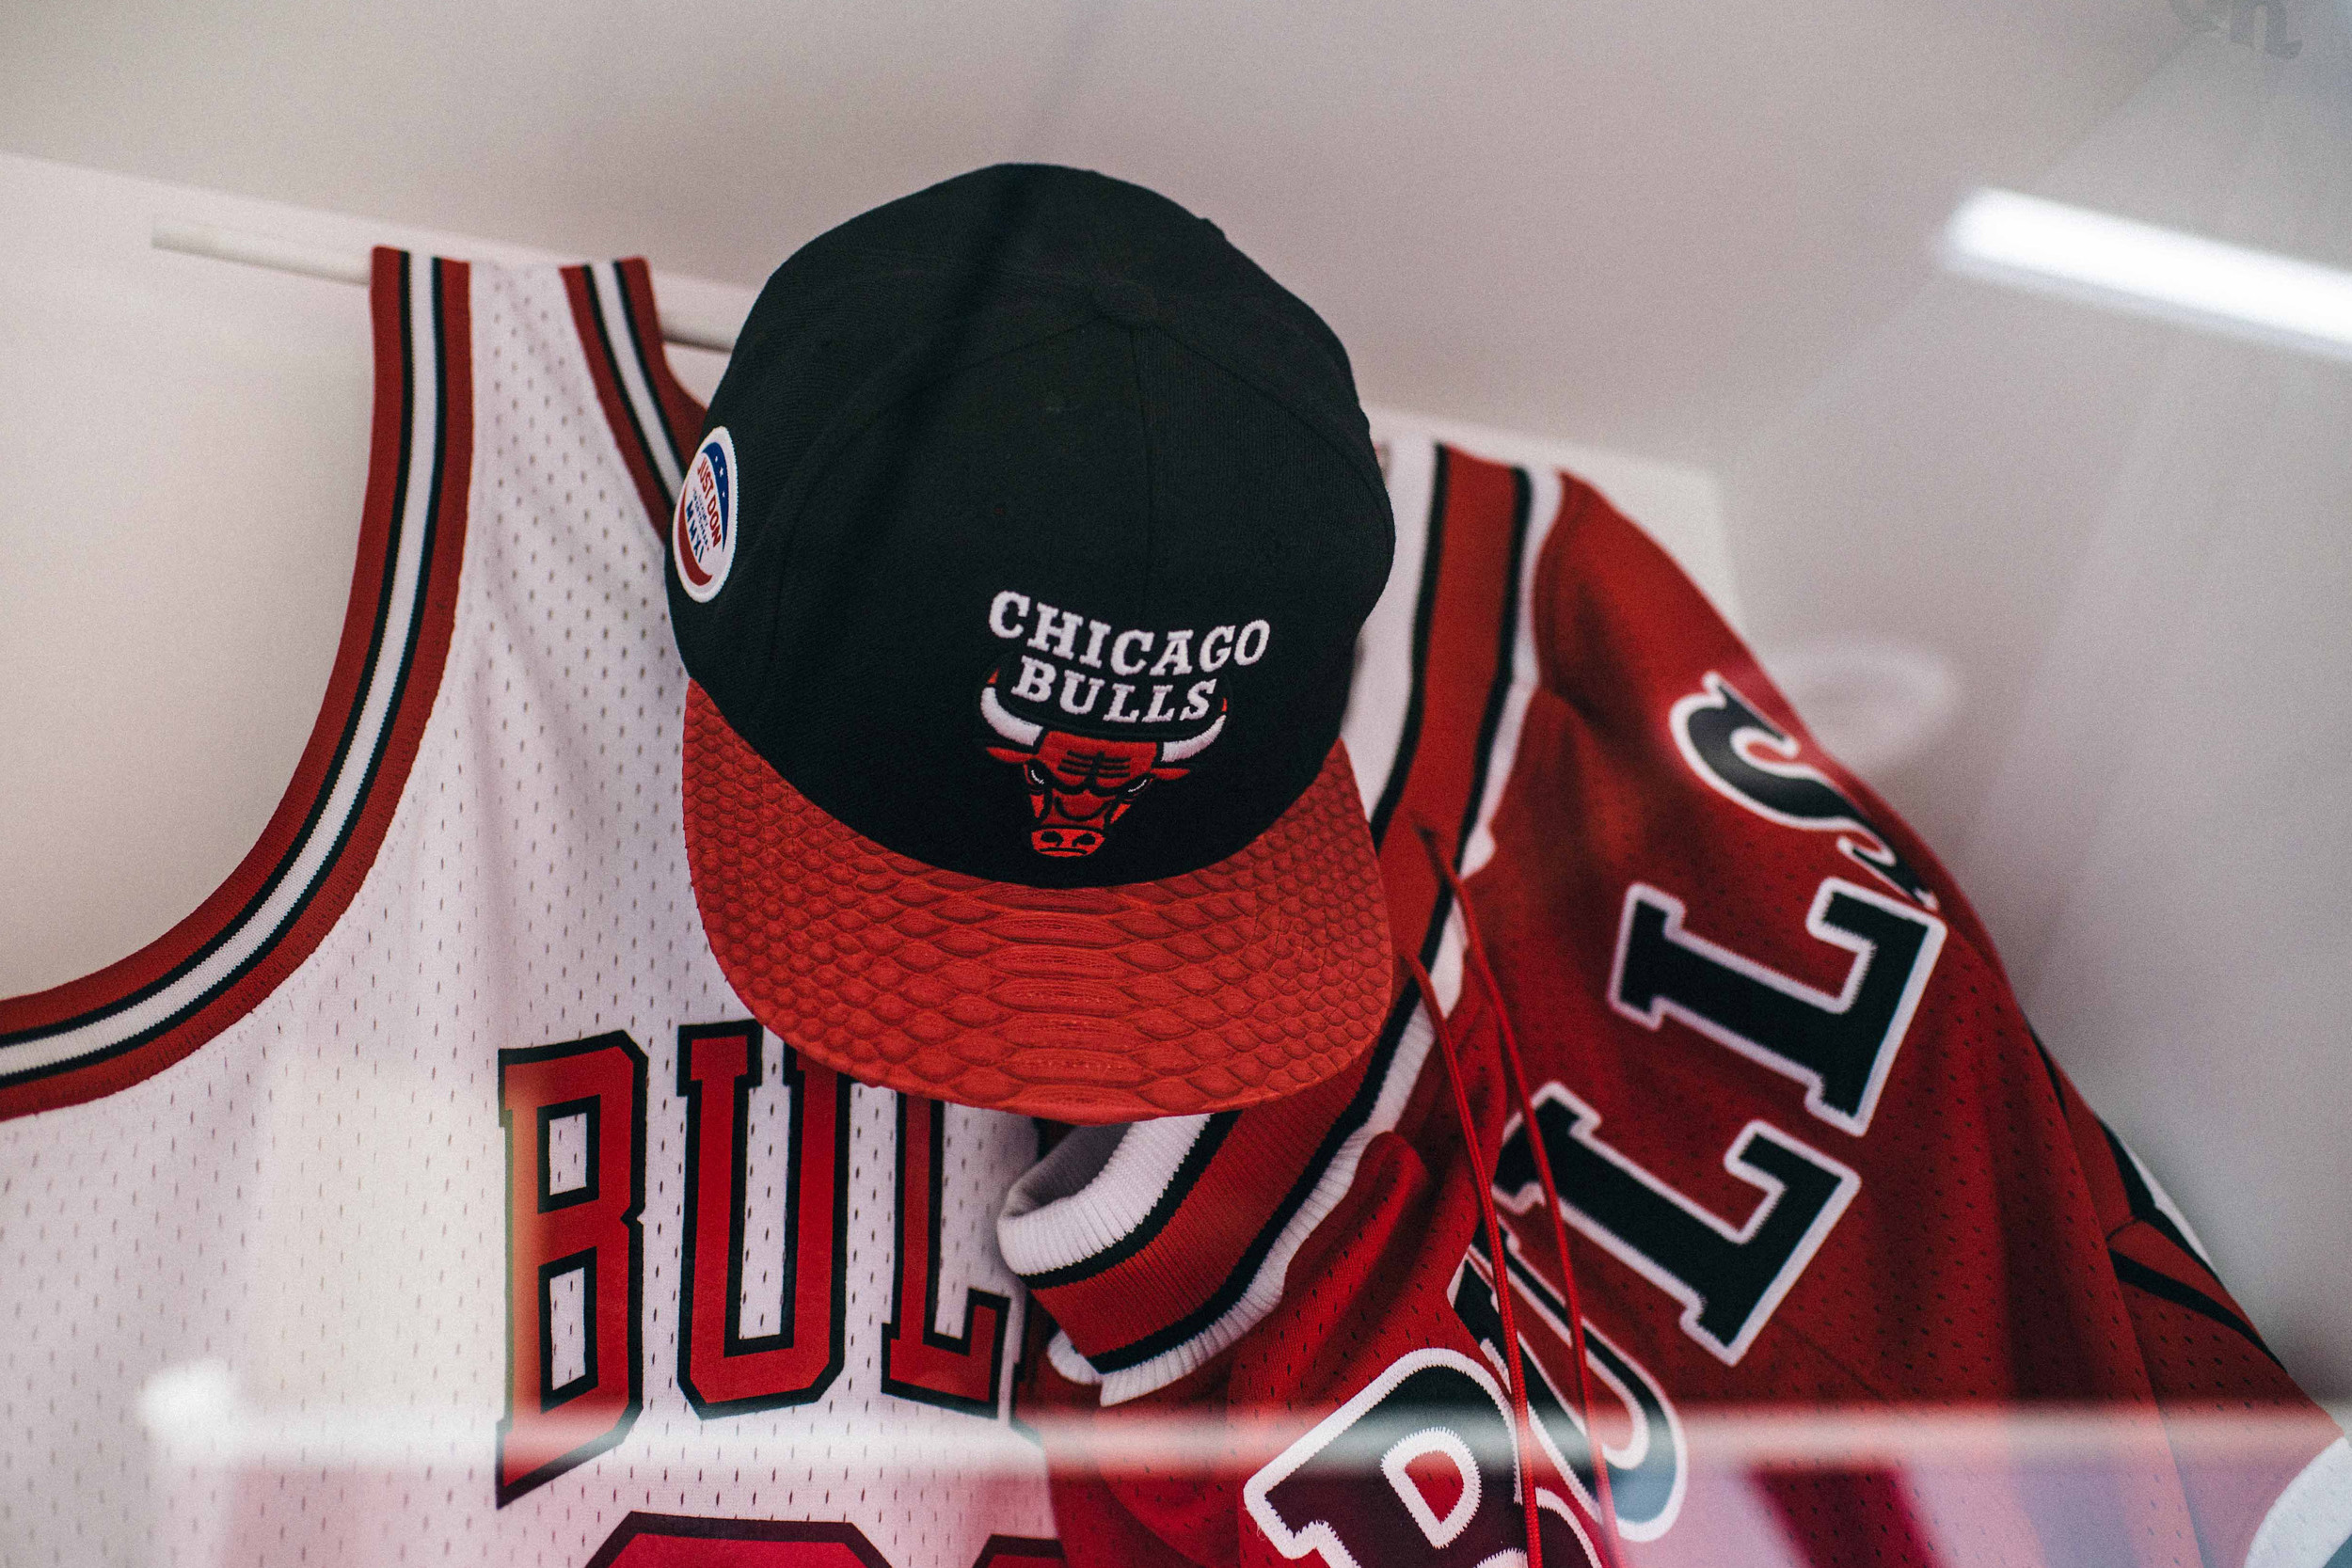  Chicago Bulls memorabilia at the Just Don® Pop-Up in Downtown Los Angeles. / Photo: © Diane Abapo, SUSPEND Magazine. 